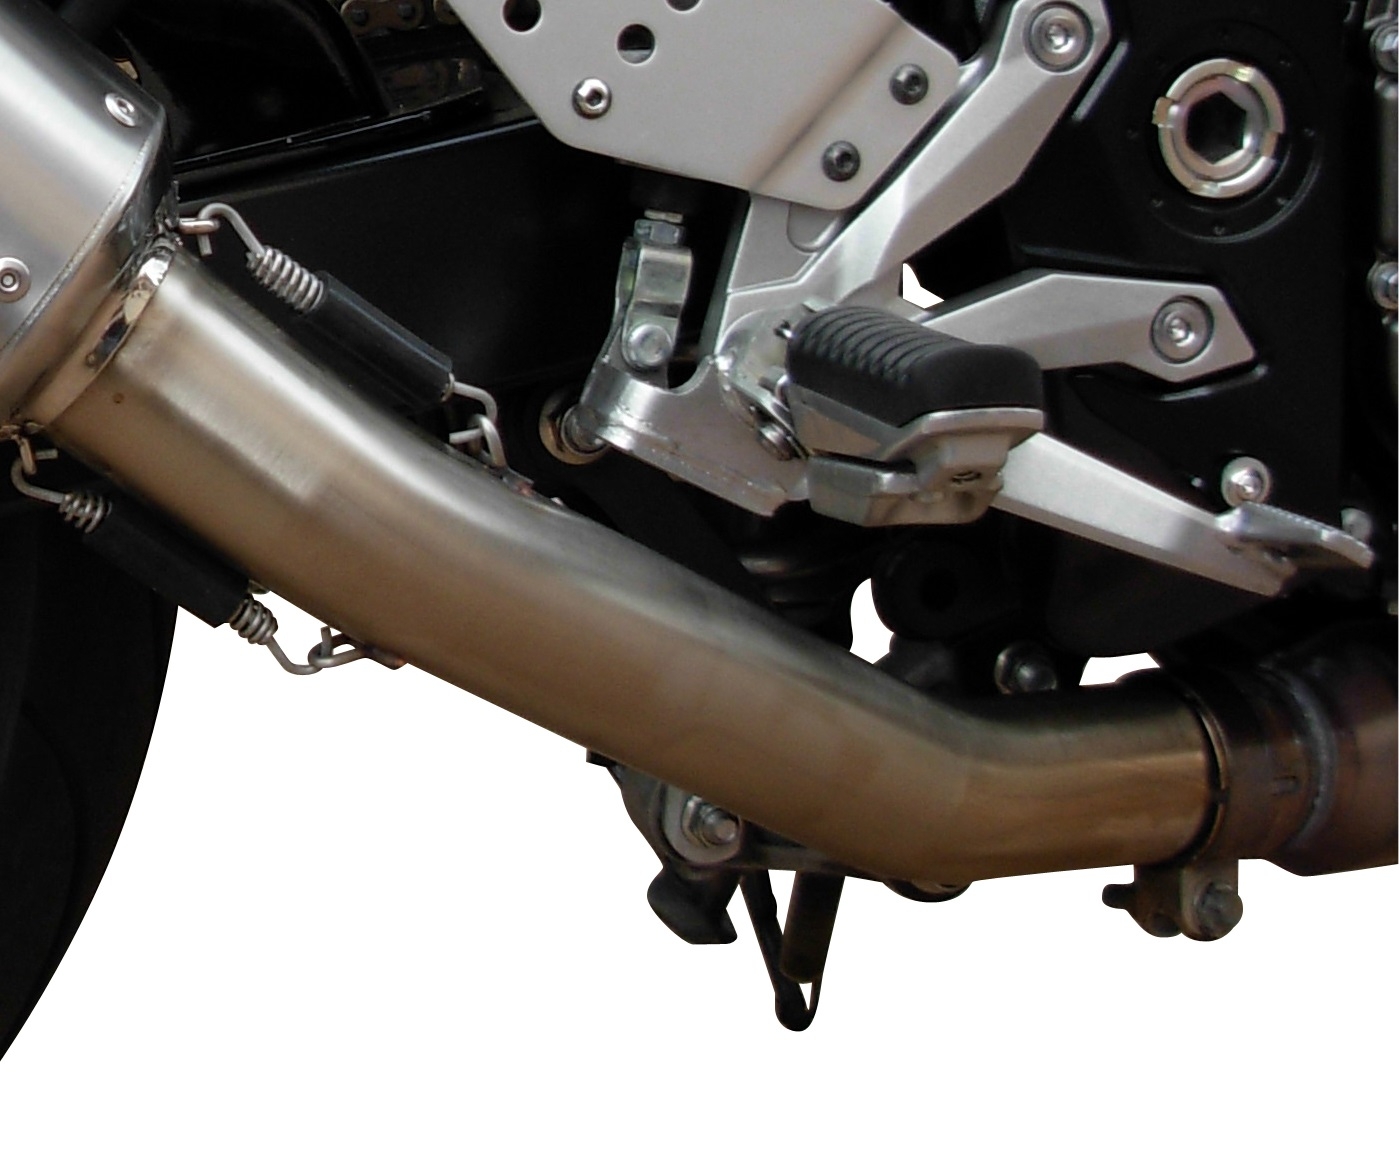 Exhaust system compatible with Kawasaki Z 750 - R 2007-2014, Ghisa , Homologated legal slip-on exhaust including removable db killer and link pipe 